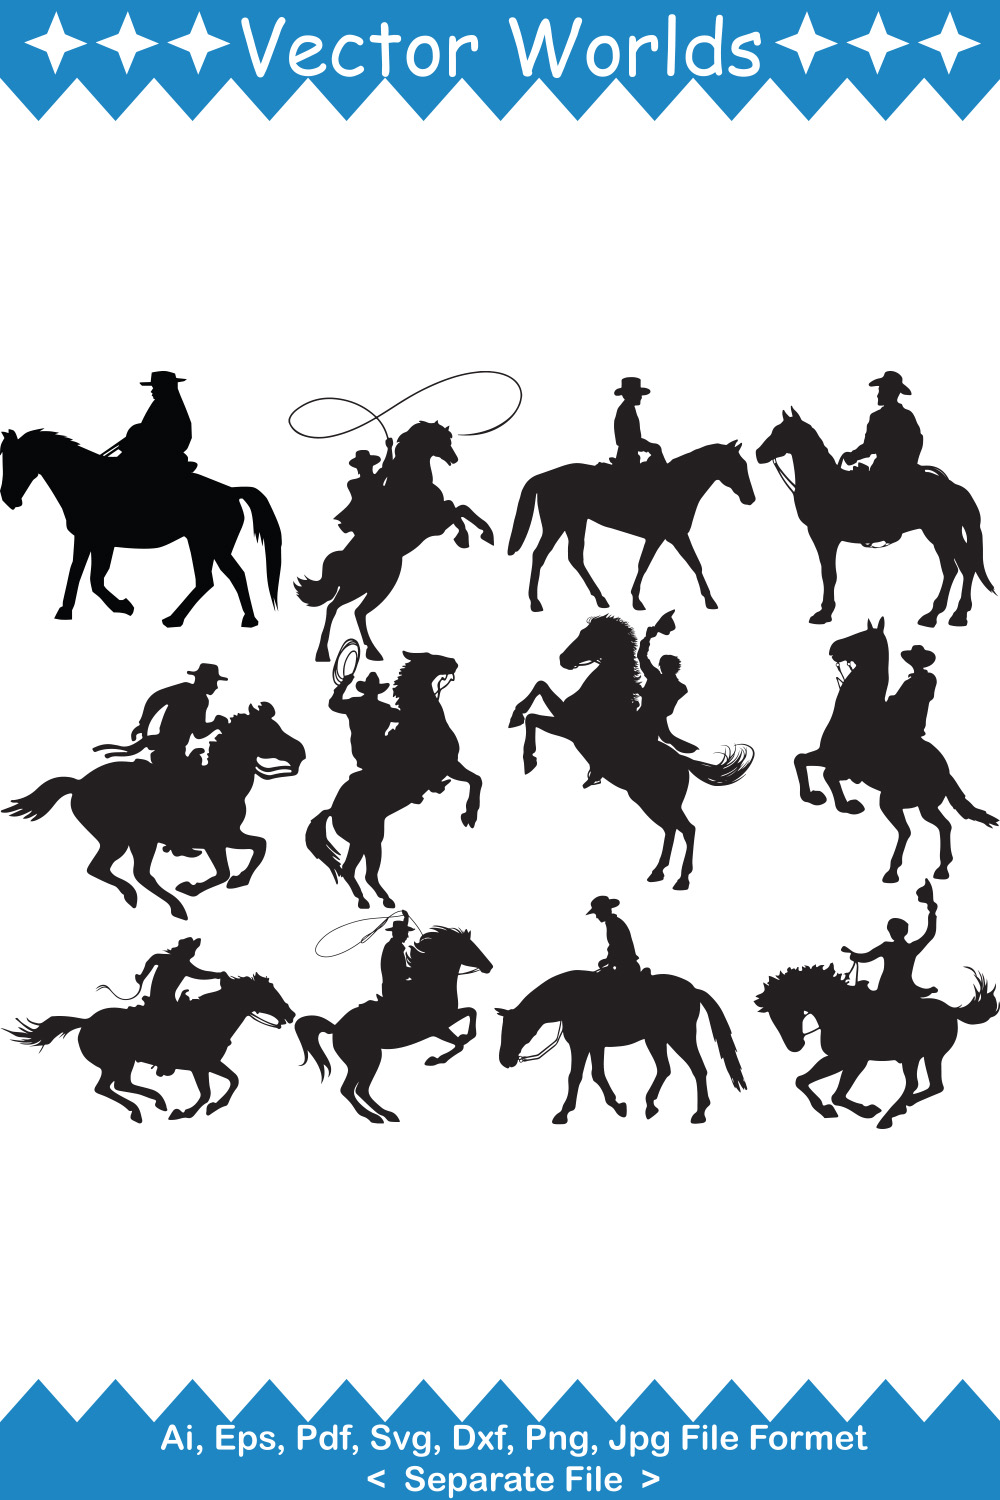 Collection of enchanting vector image of silhouettes of cowboys on a horse